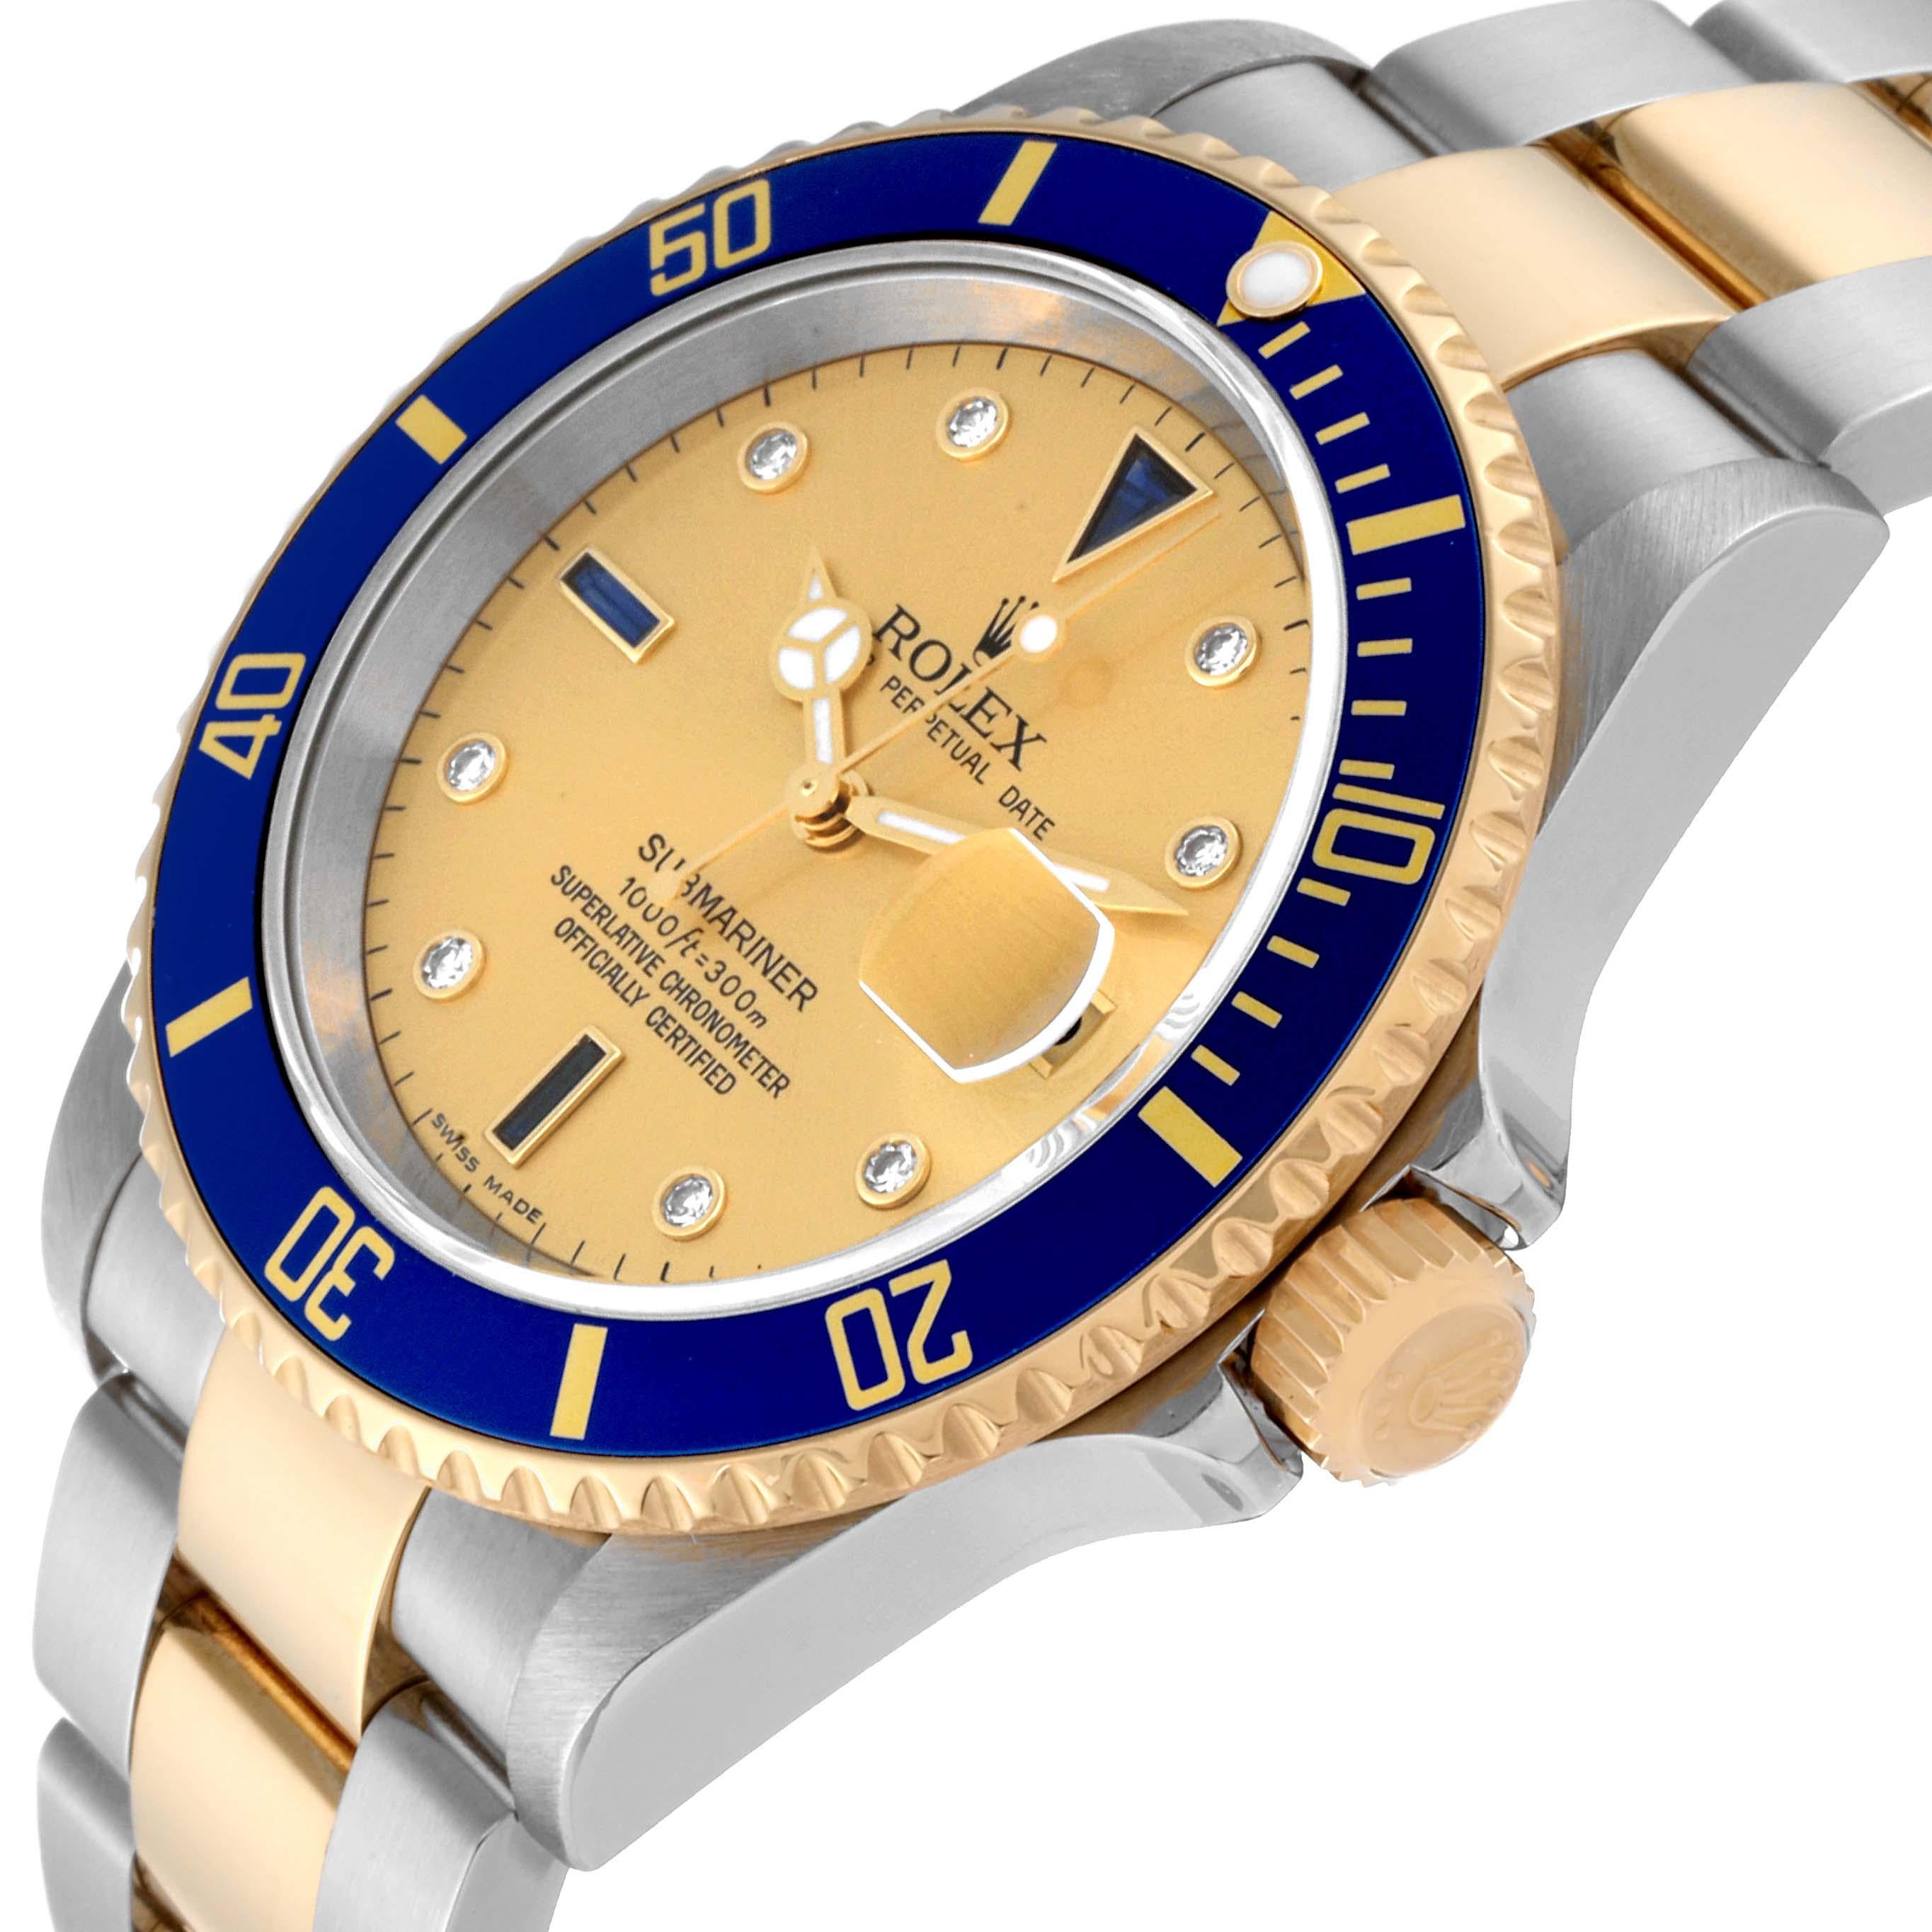 Rolex Submariner Steel Yellow Gold Diamond Serti Dial Mens Watch 16613 Box Card. Officially certified chronometer automatic self-winding movement. Stainless steel and 18k yellow gold case 40 mm in diameter. Rolex logo on the crown. Blue insert